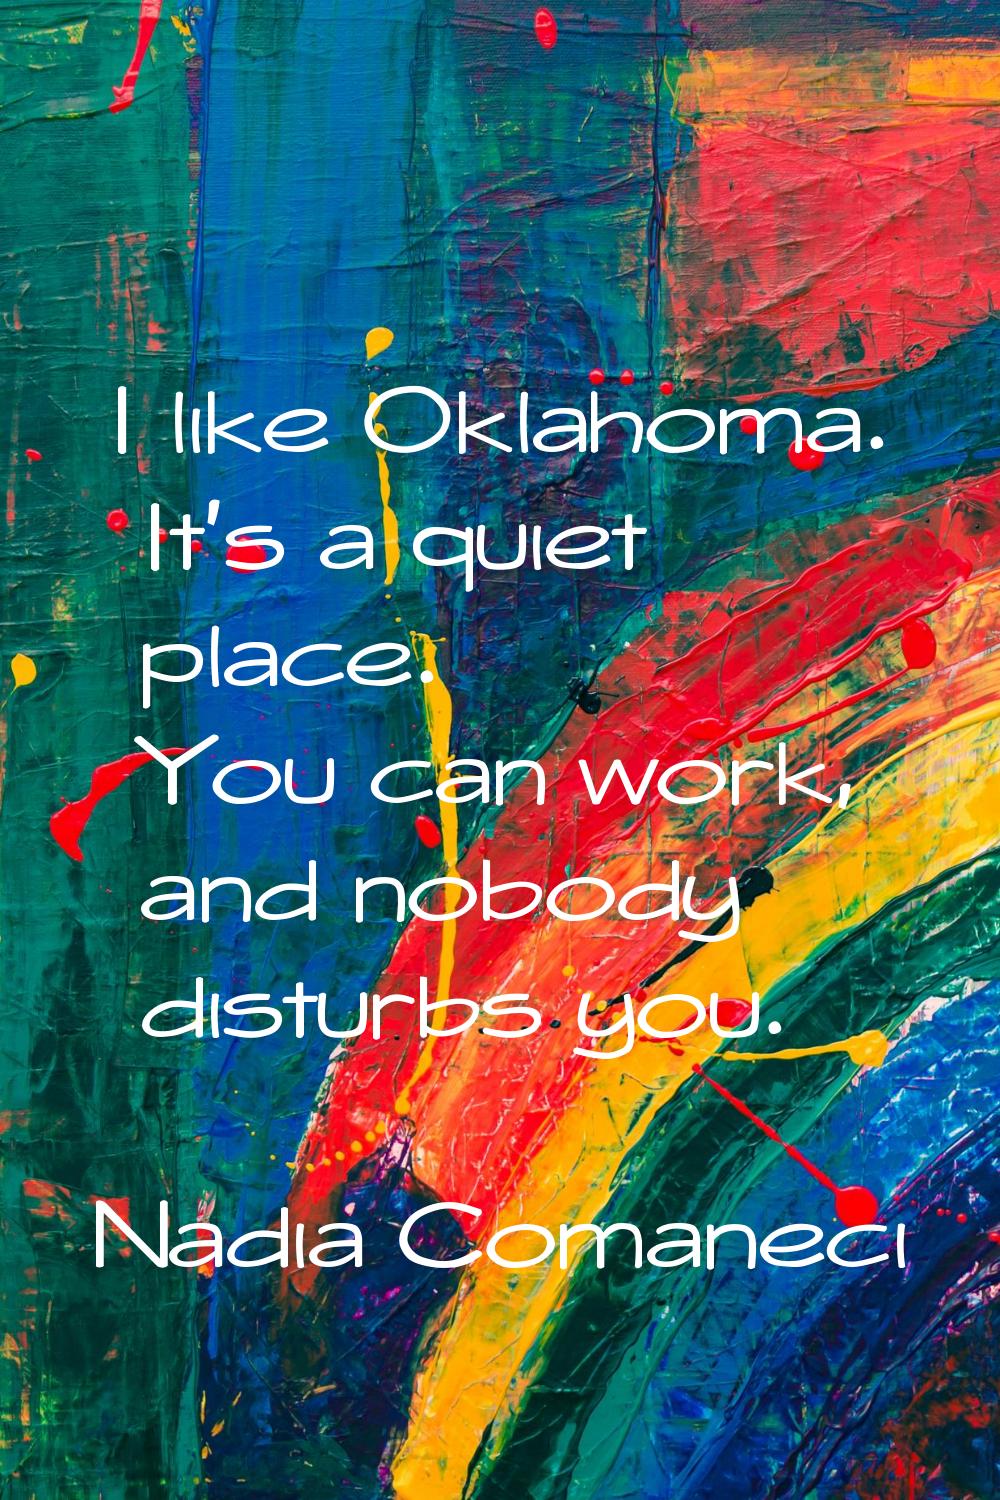 I like Oklahoma. It's a quiet place. You can work, and nobody disturbs you.